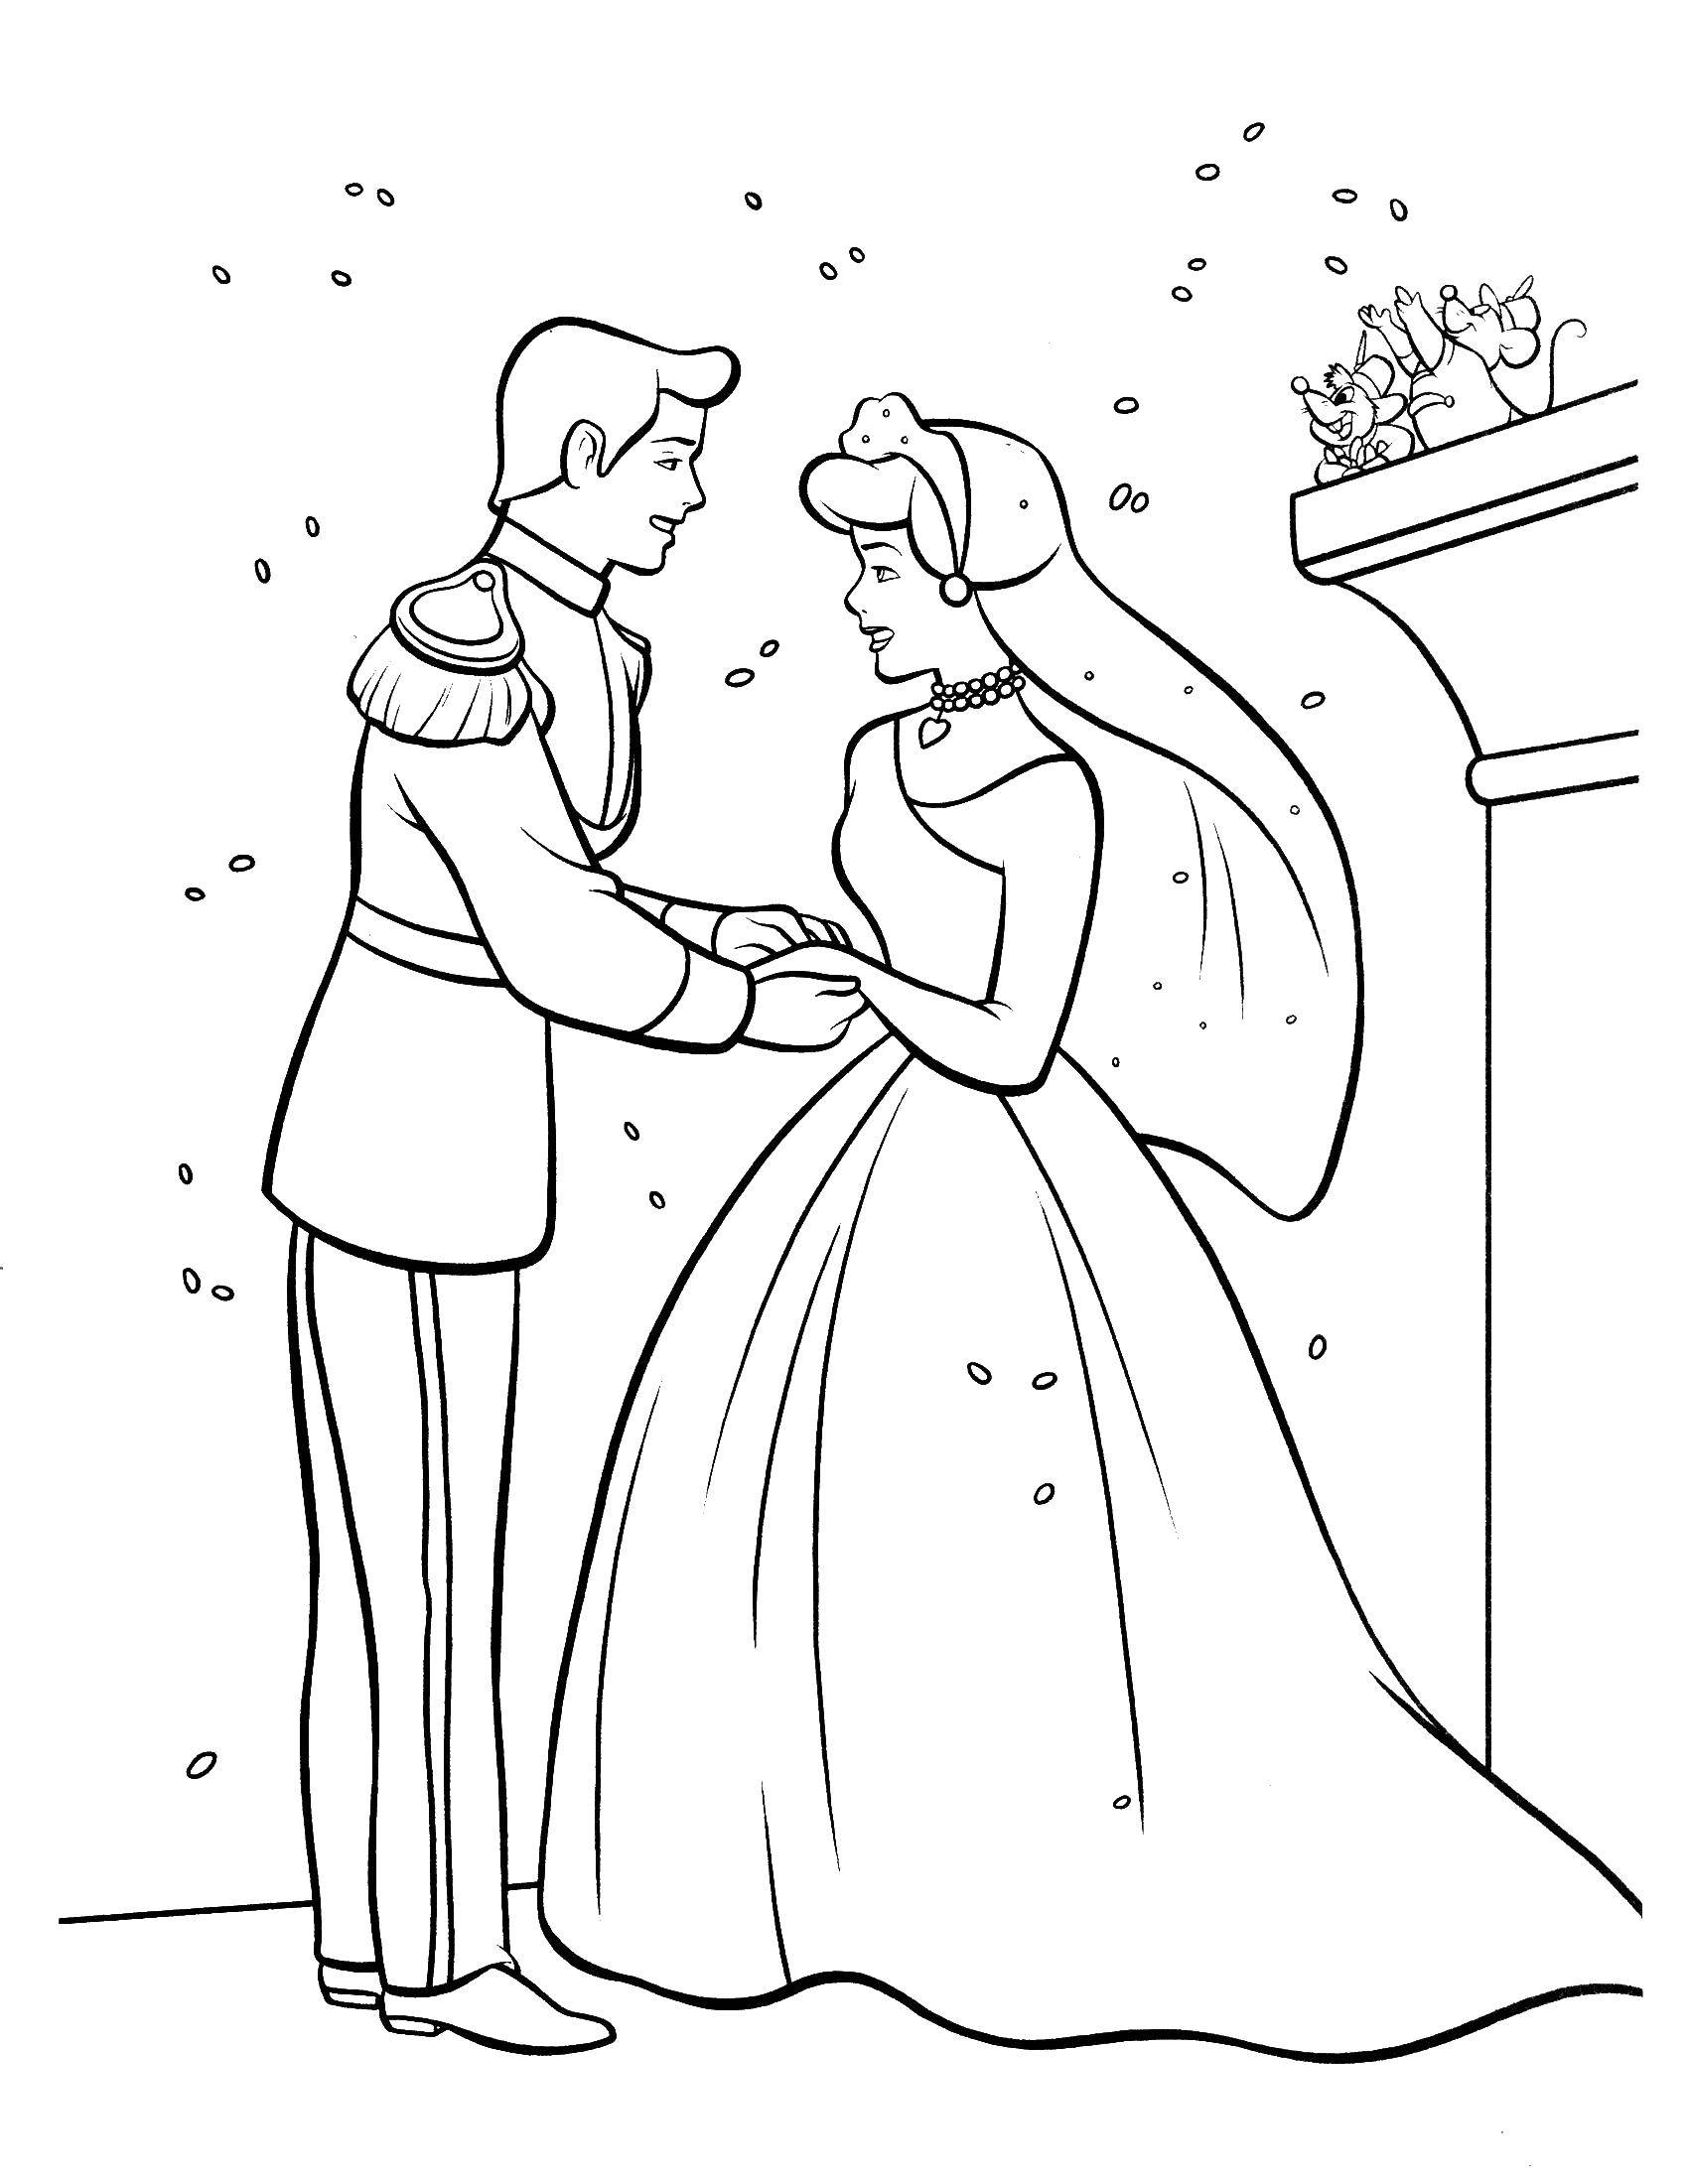 Online coloring pages Prince, Coloring Prince and Princess Wedding.